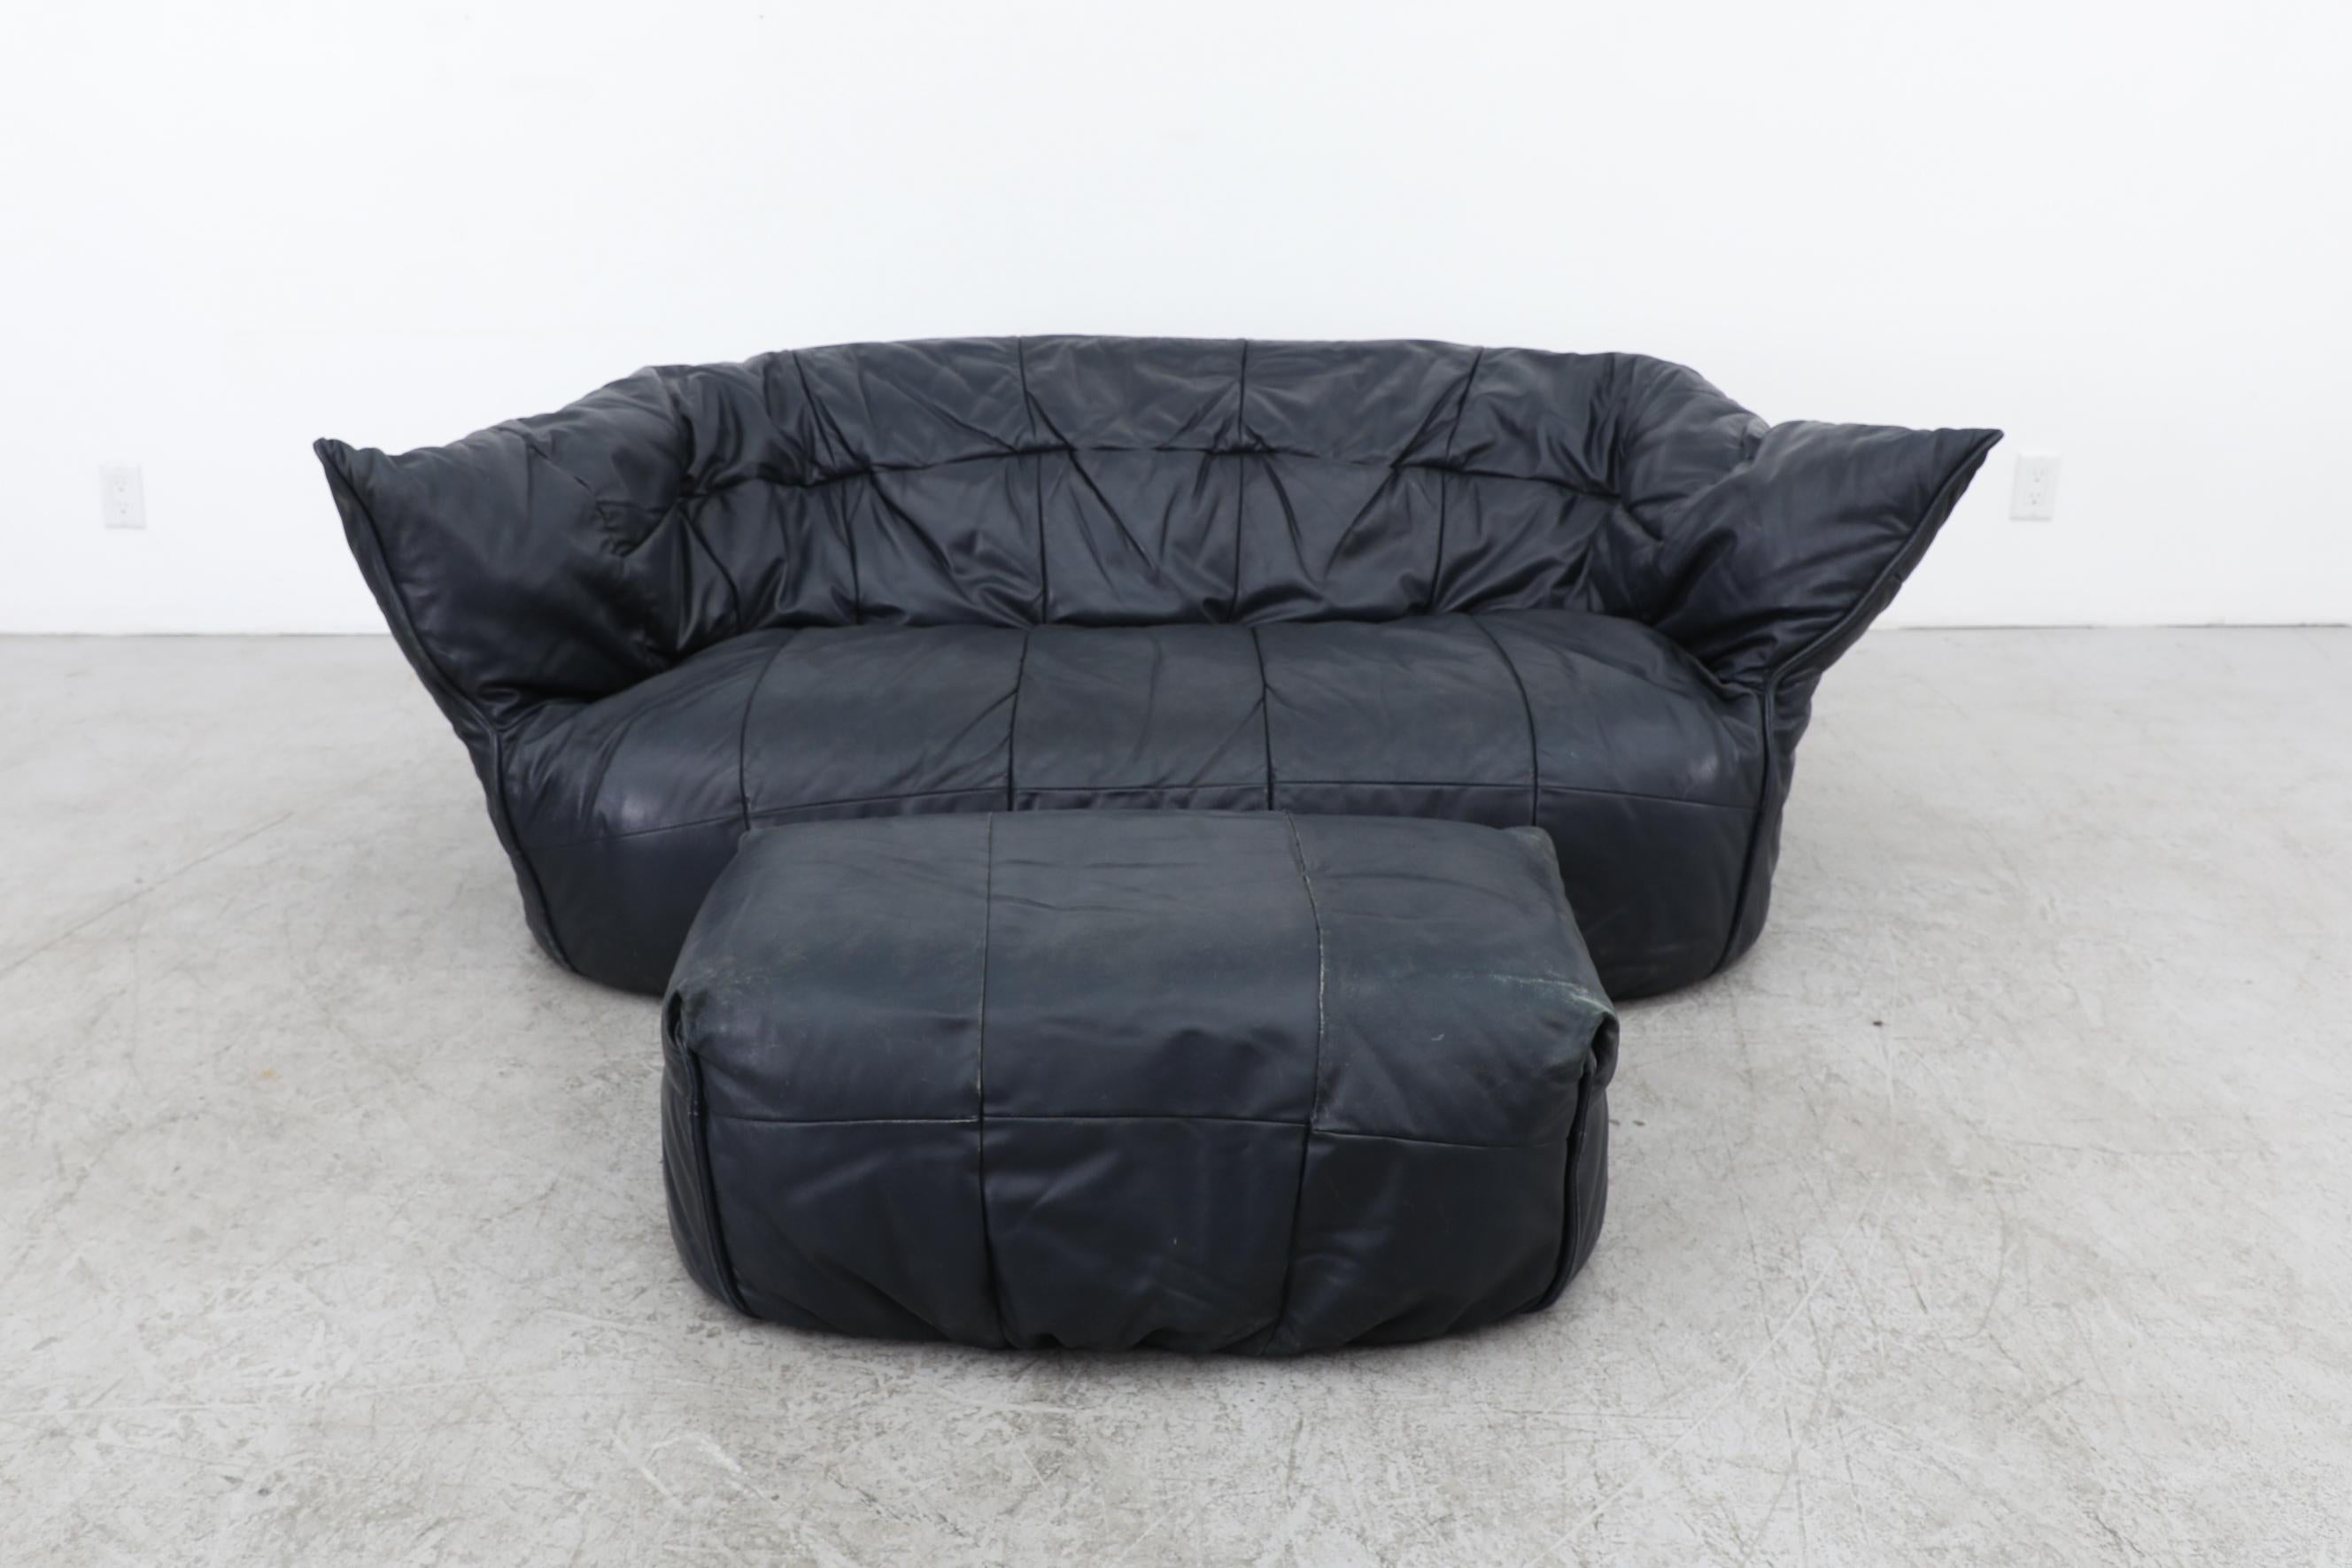 Lignet Roset Brigatin Navy blue leather loveseat and ottoman by Michel Ducaroy for Ligne Roset, 1970's. Eye catching distinct curvature defines the piece's timeless appeal and makes it visually appealing and physically inviting.
This soft form sofa